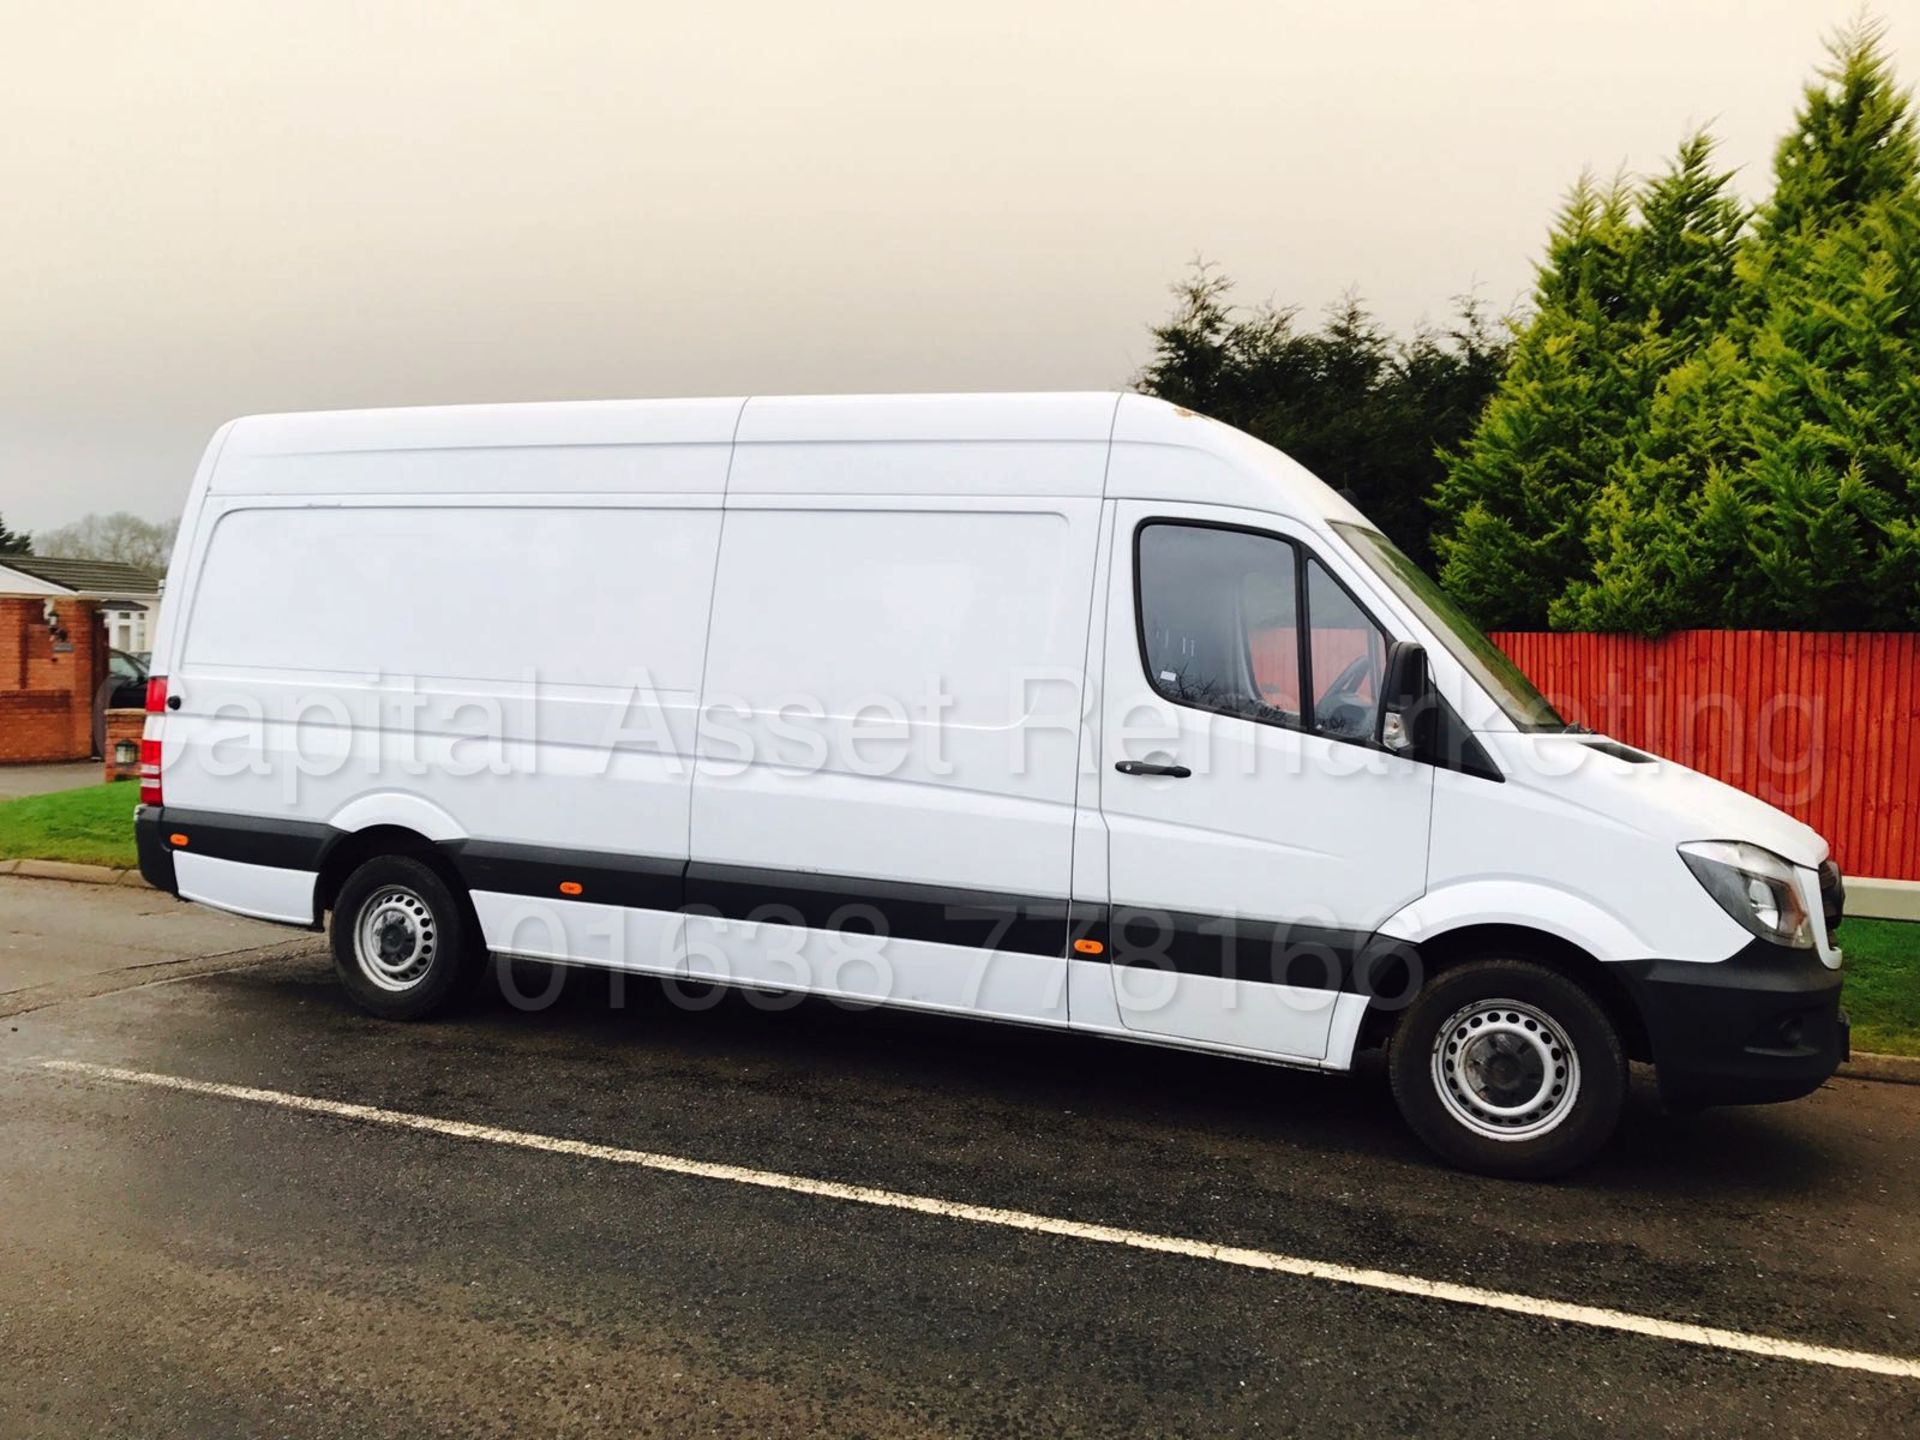 ON SALE MERCEDES SPRINTER 313CDI "LWB HIGH ROOF" NEW SHAPE - 14 REG - LOW MILES - ELEC PACK - WOW!!! - Image 2 of 11